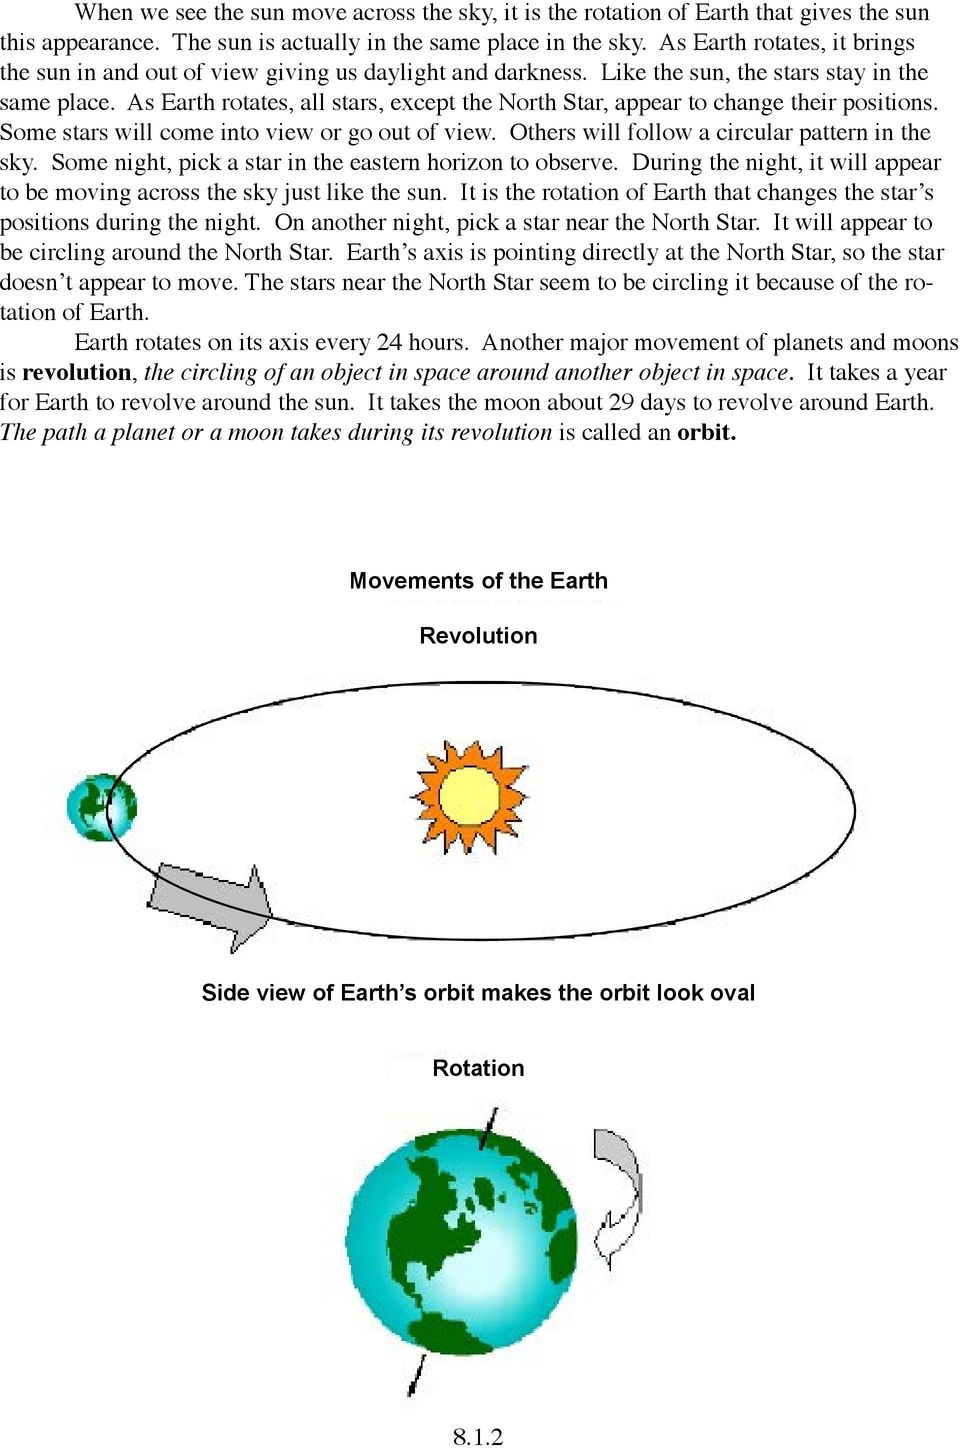 As Earth rotates, all stars, except the North Star, appear to change their positions. Some stars will come into view or go out of view. Others will follow a circular pattern in the sky.